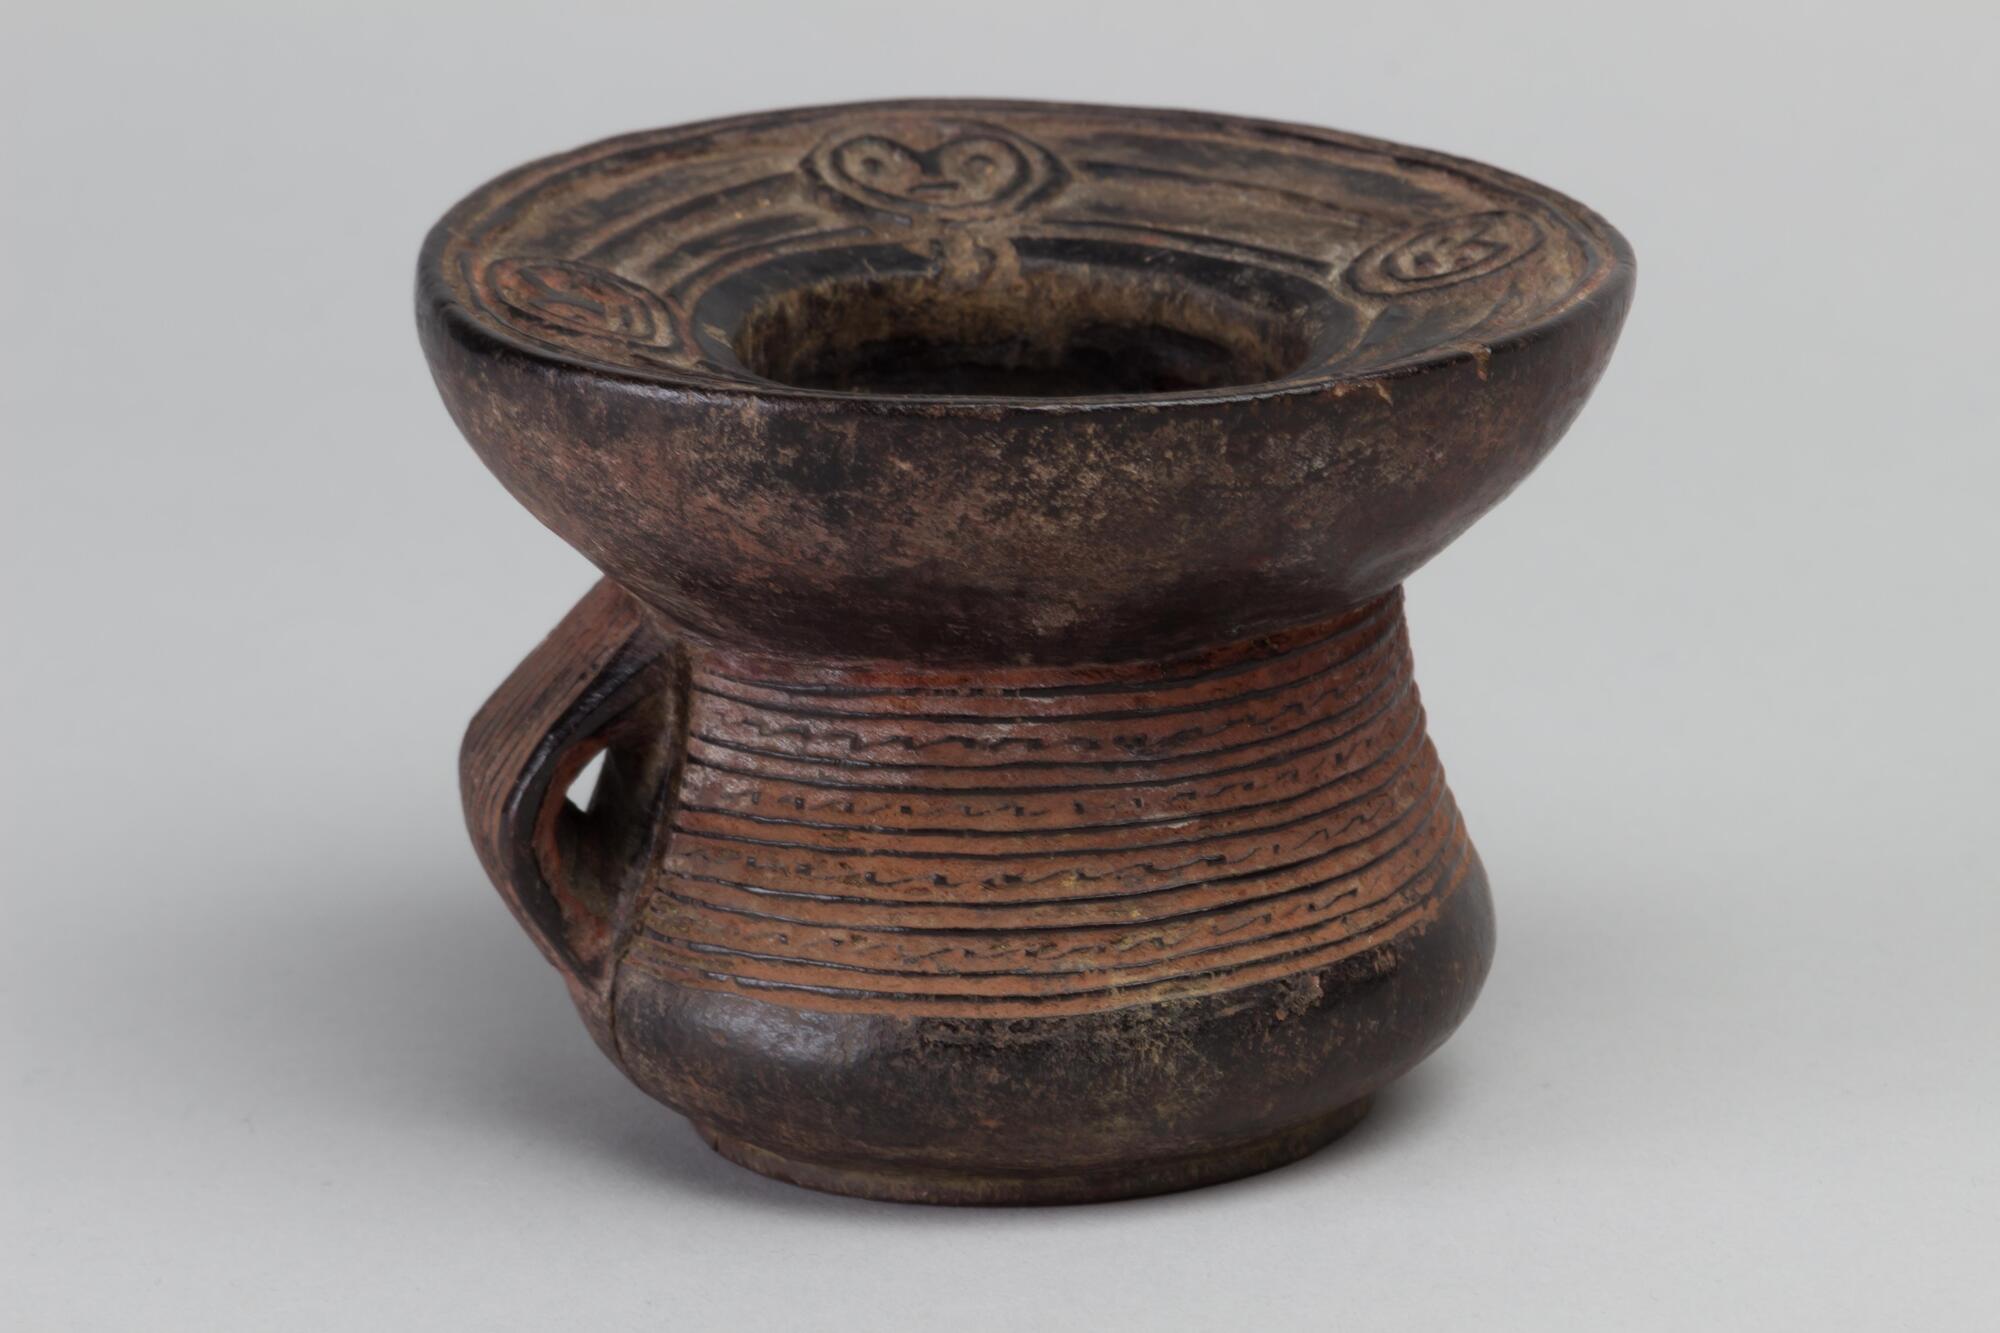 Cylindrical vessel with handle and a slightly buldging base. The rim is extended with faces designed on the inside of the rim's lip. There are linear design patterns wrapped around the cylinder portion of the vessel. 